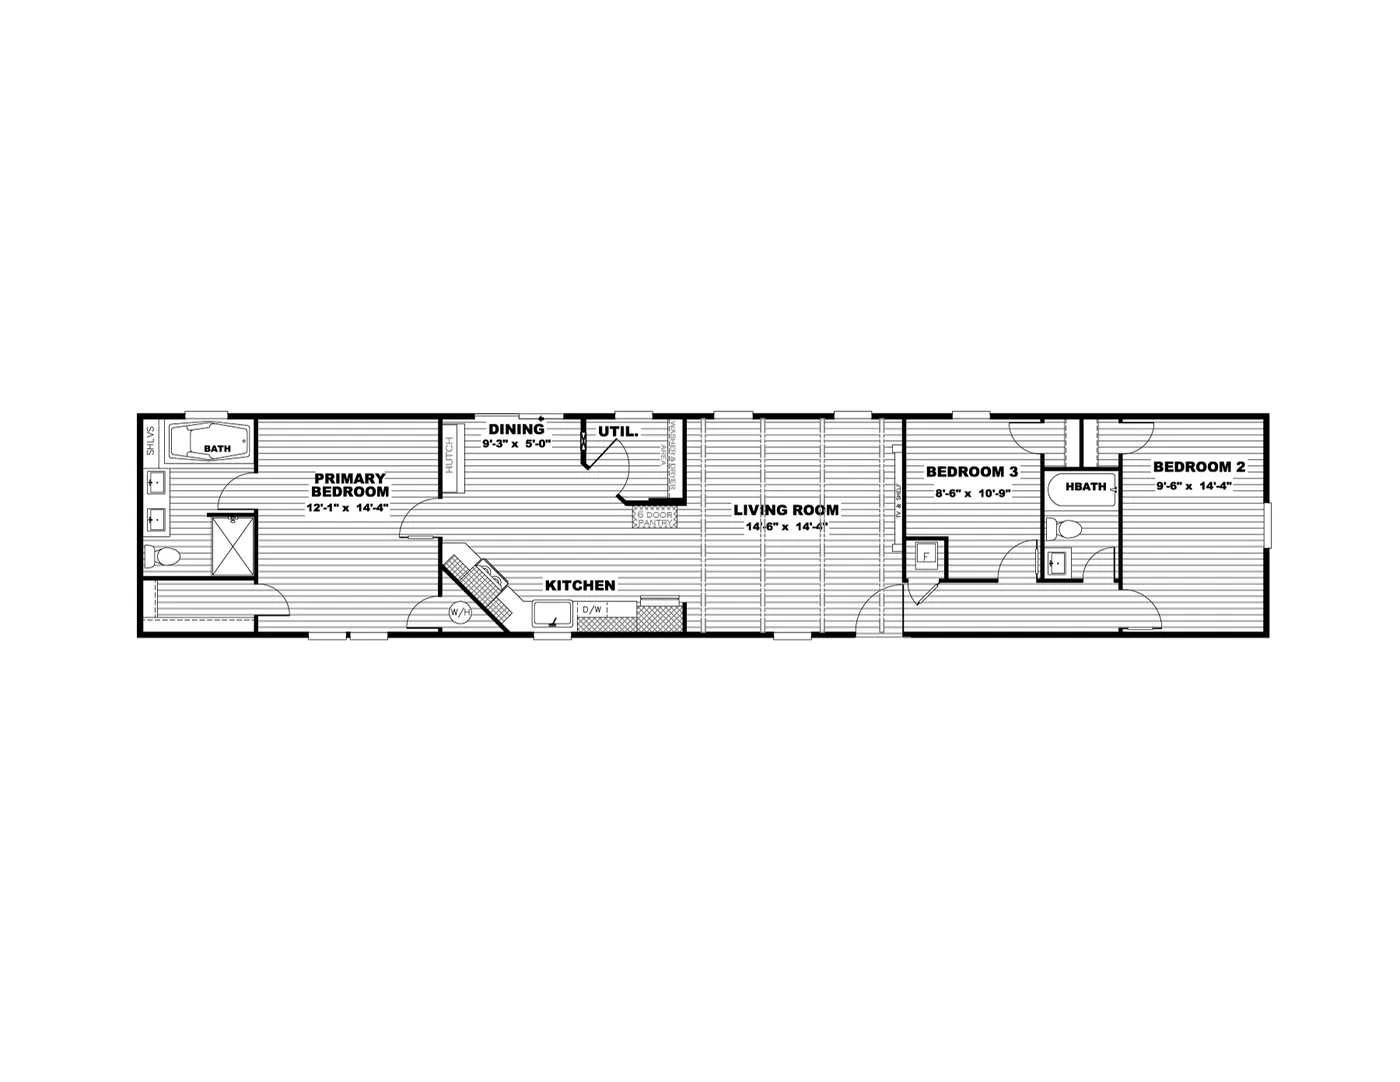 The THE ANNIVERSARY FARMHOUSE Floor Plan. This Manufactured Mobile Home features 3 bedrooms and 2 baths.